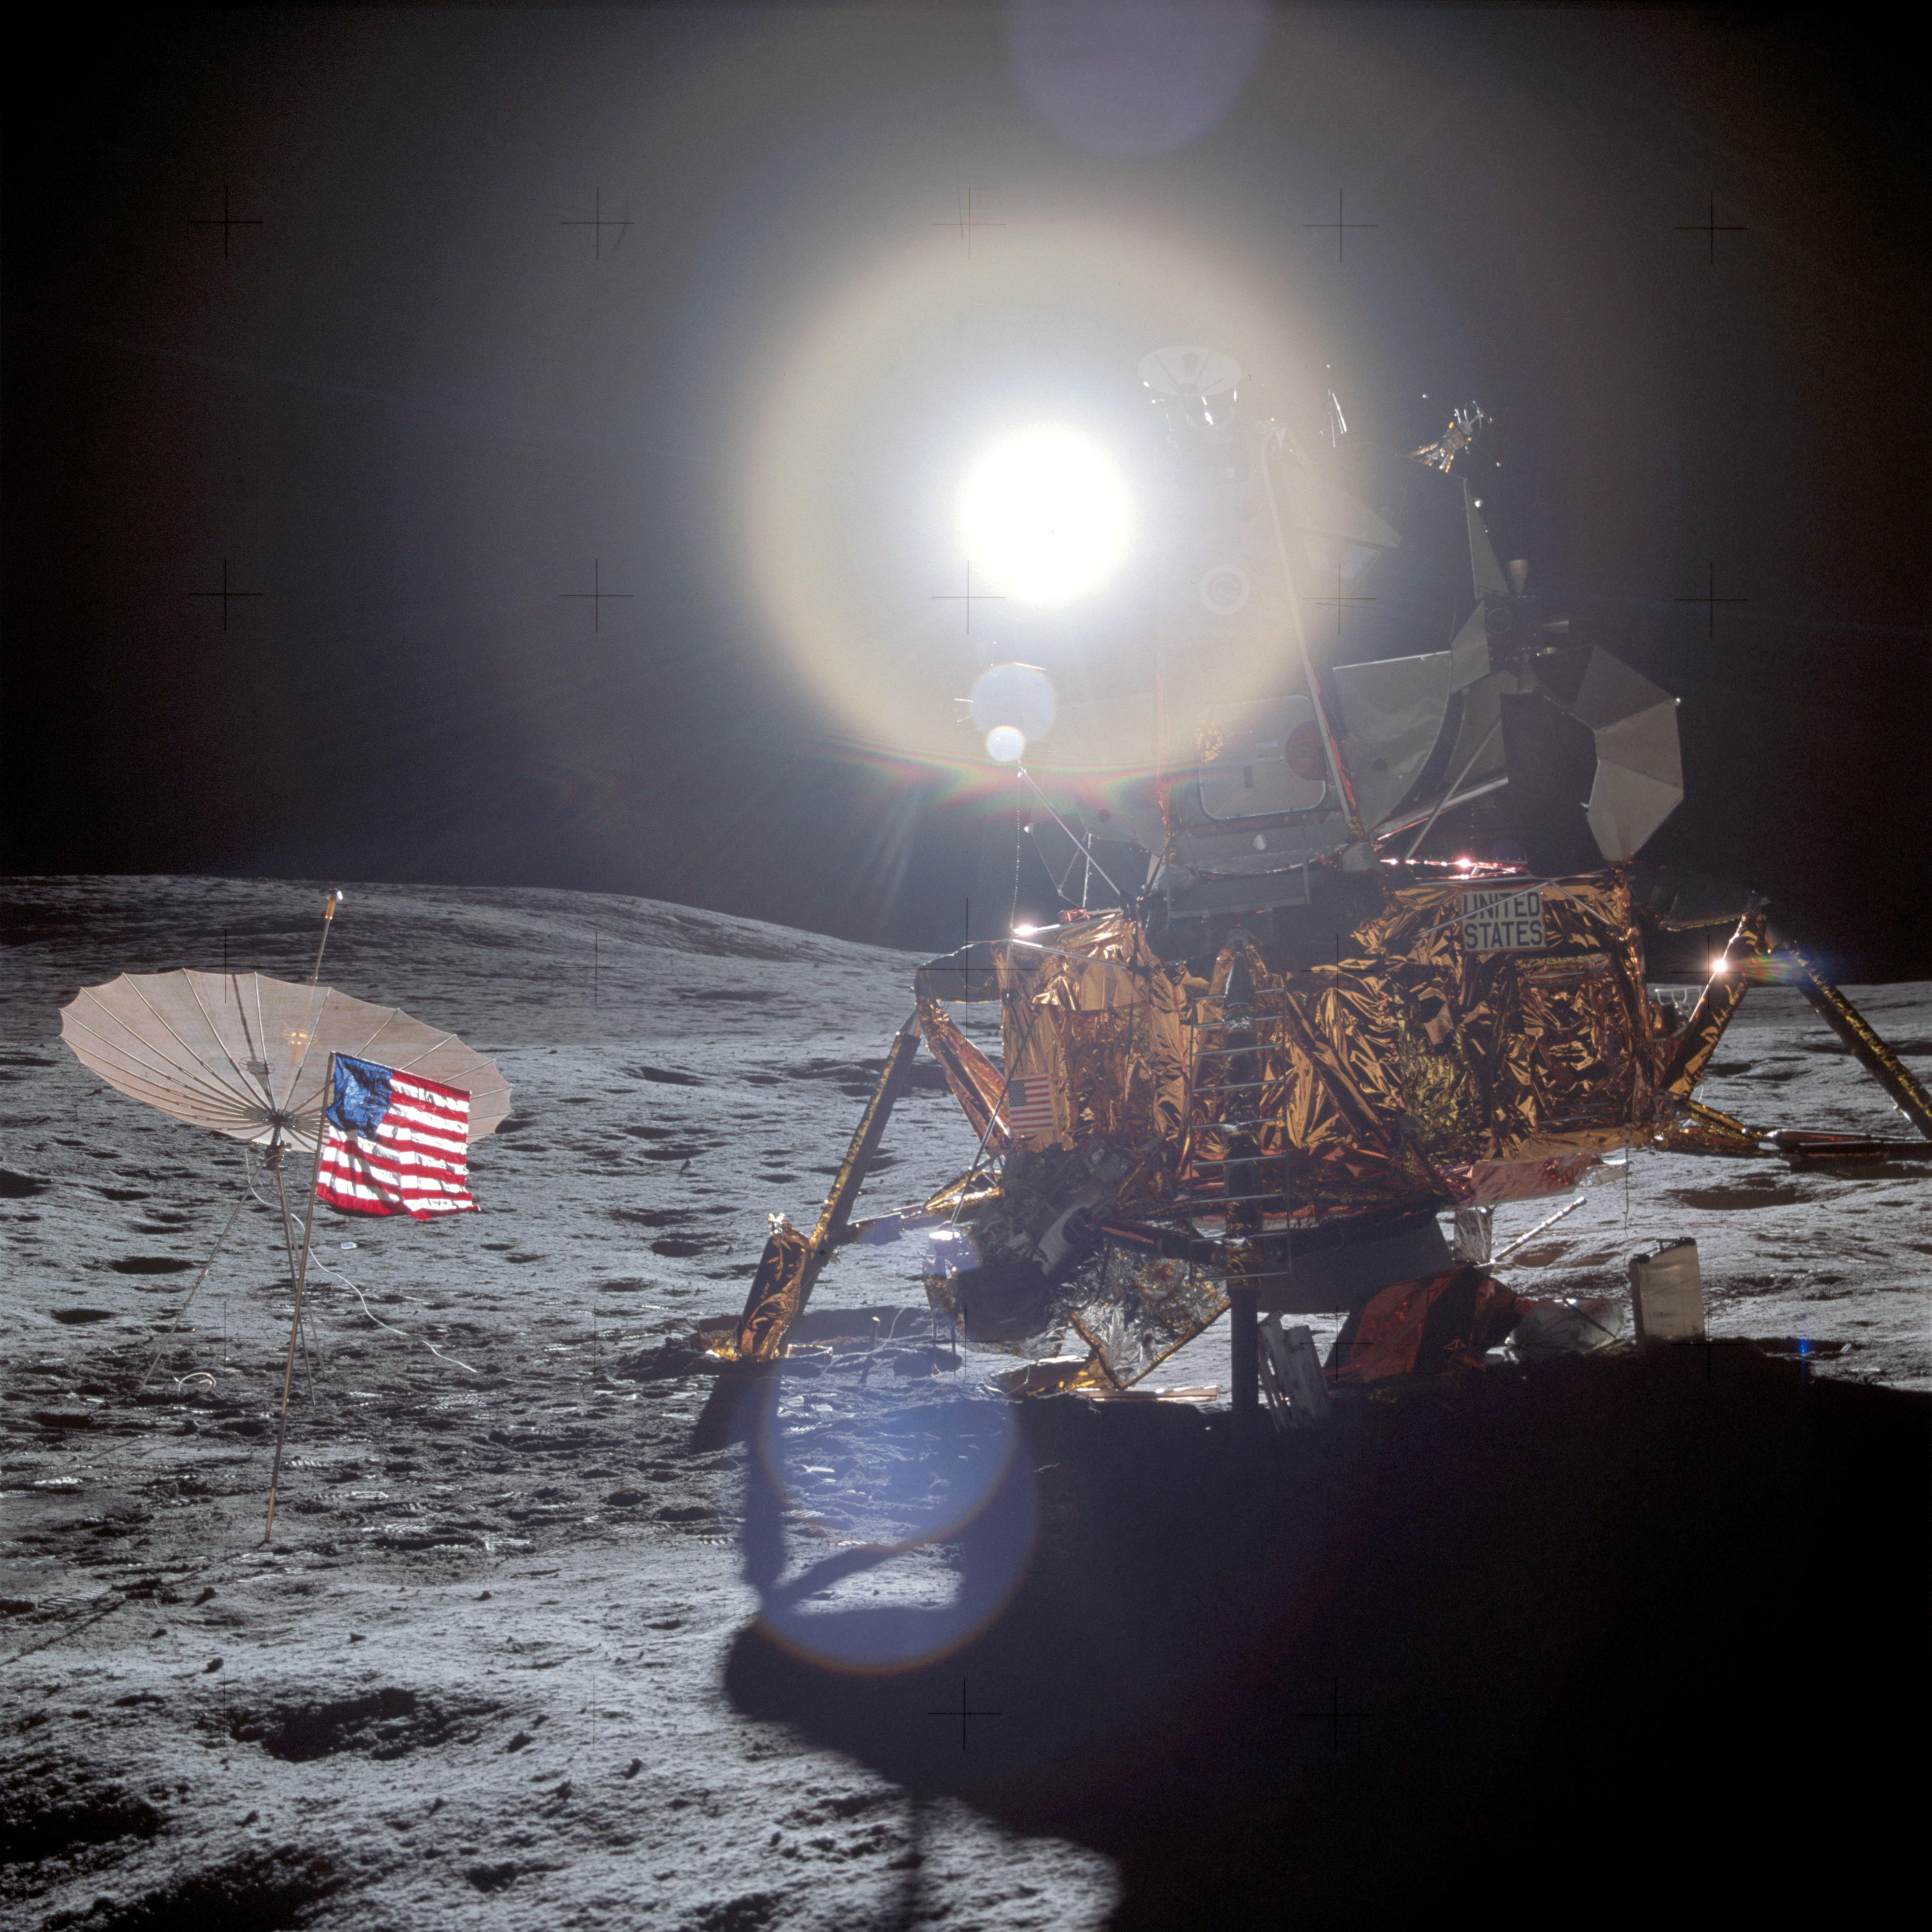 The Apollo 14 Lunar Module on the surface of the Moon. A small American flag and small antenna are planted a few feet away. In the background, the Sun creates a bright flare.